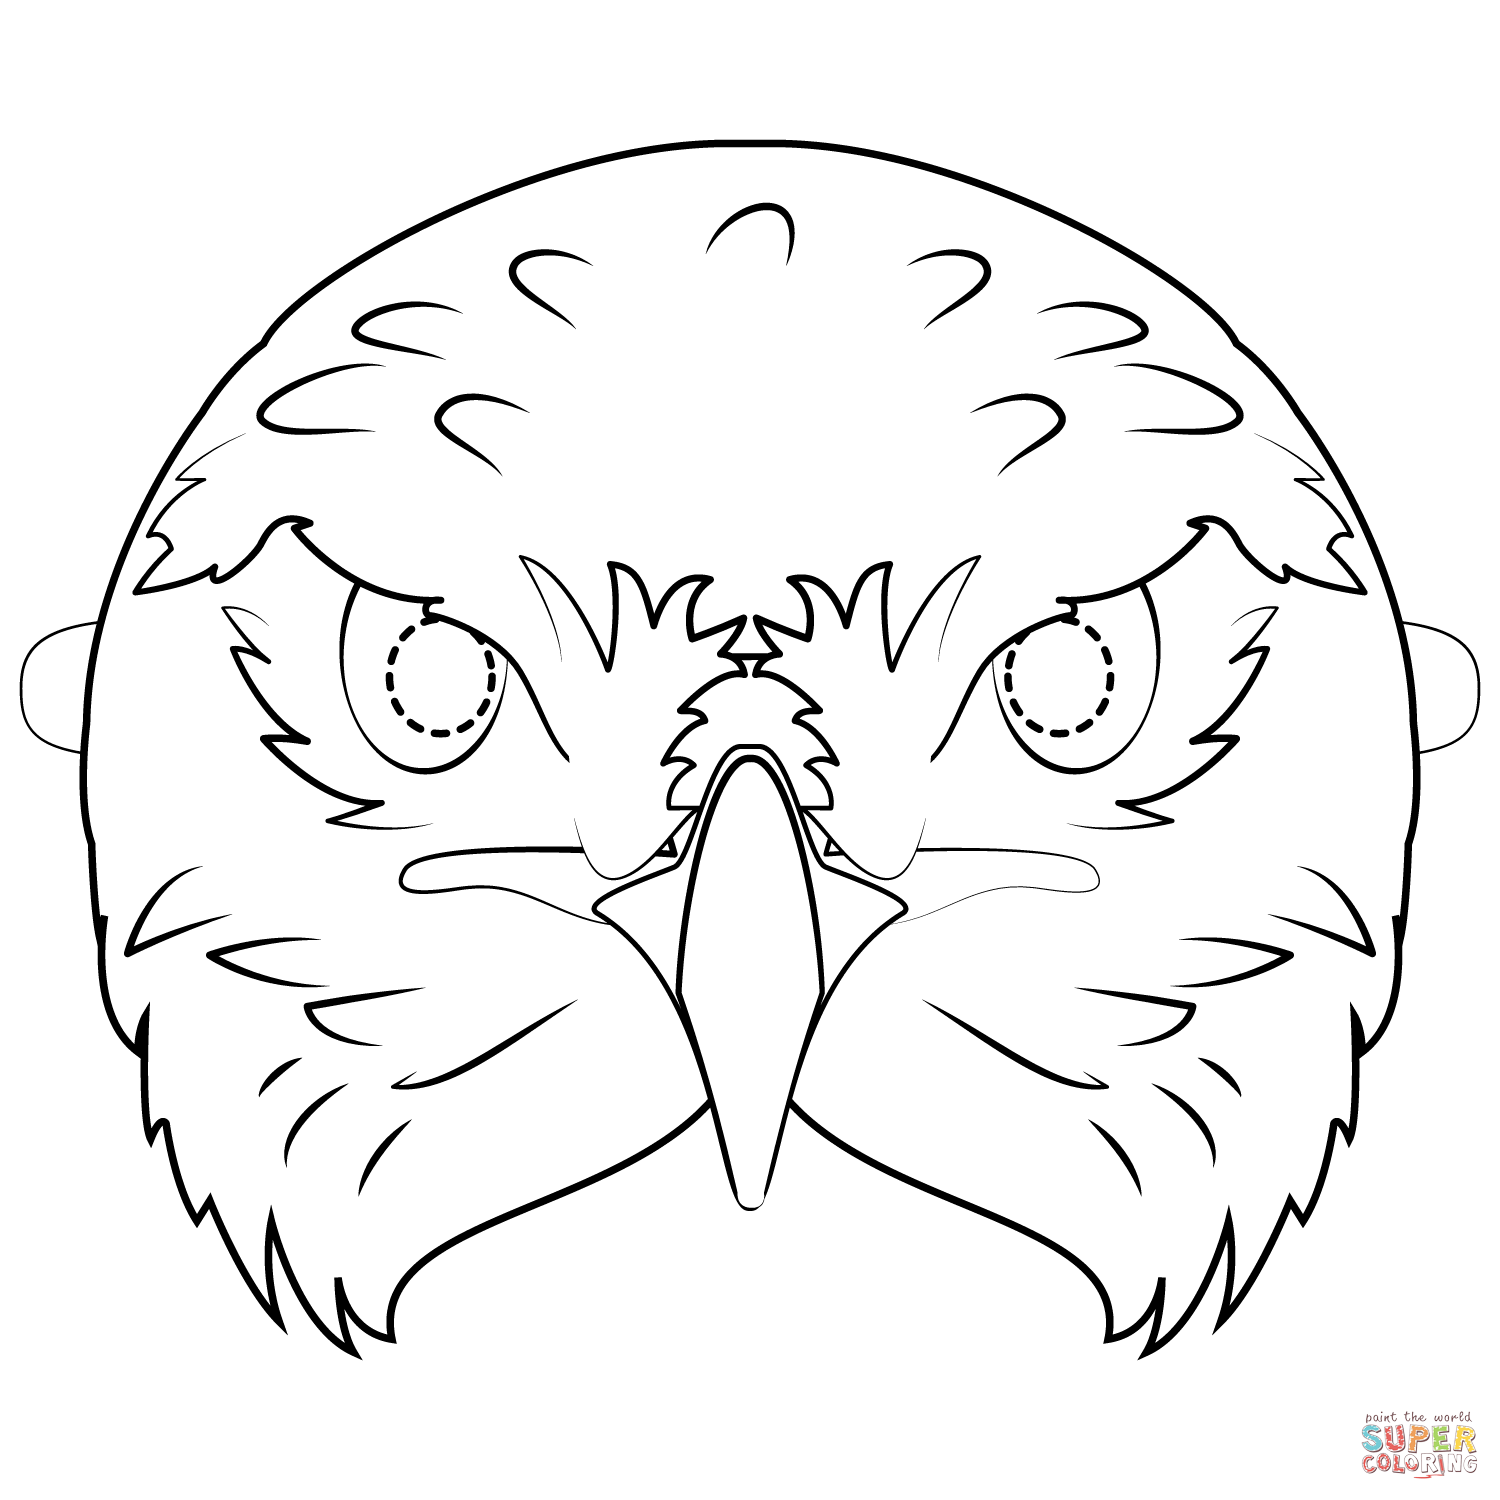 Hawk Mask coloring page | Free Printable Coloring Pages